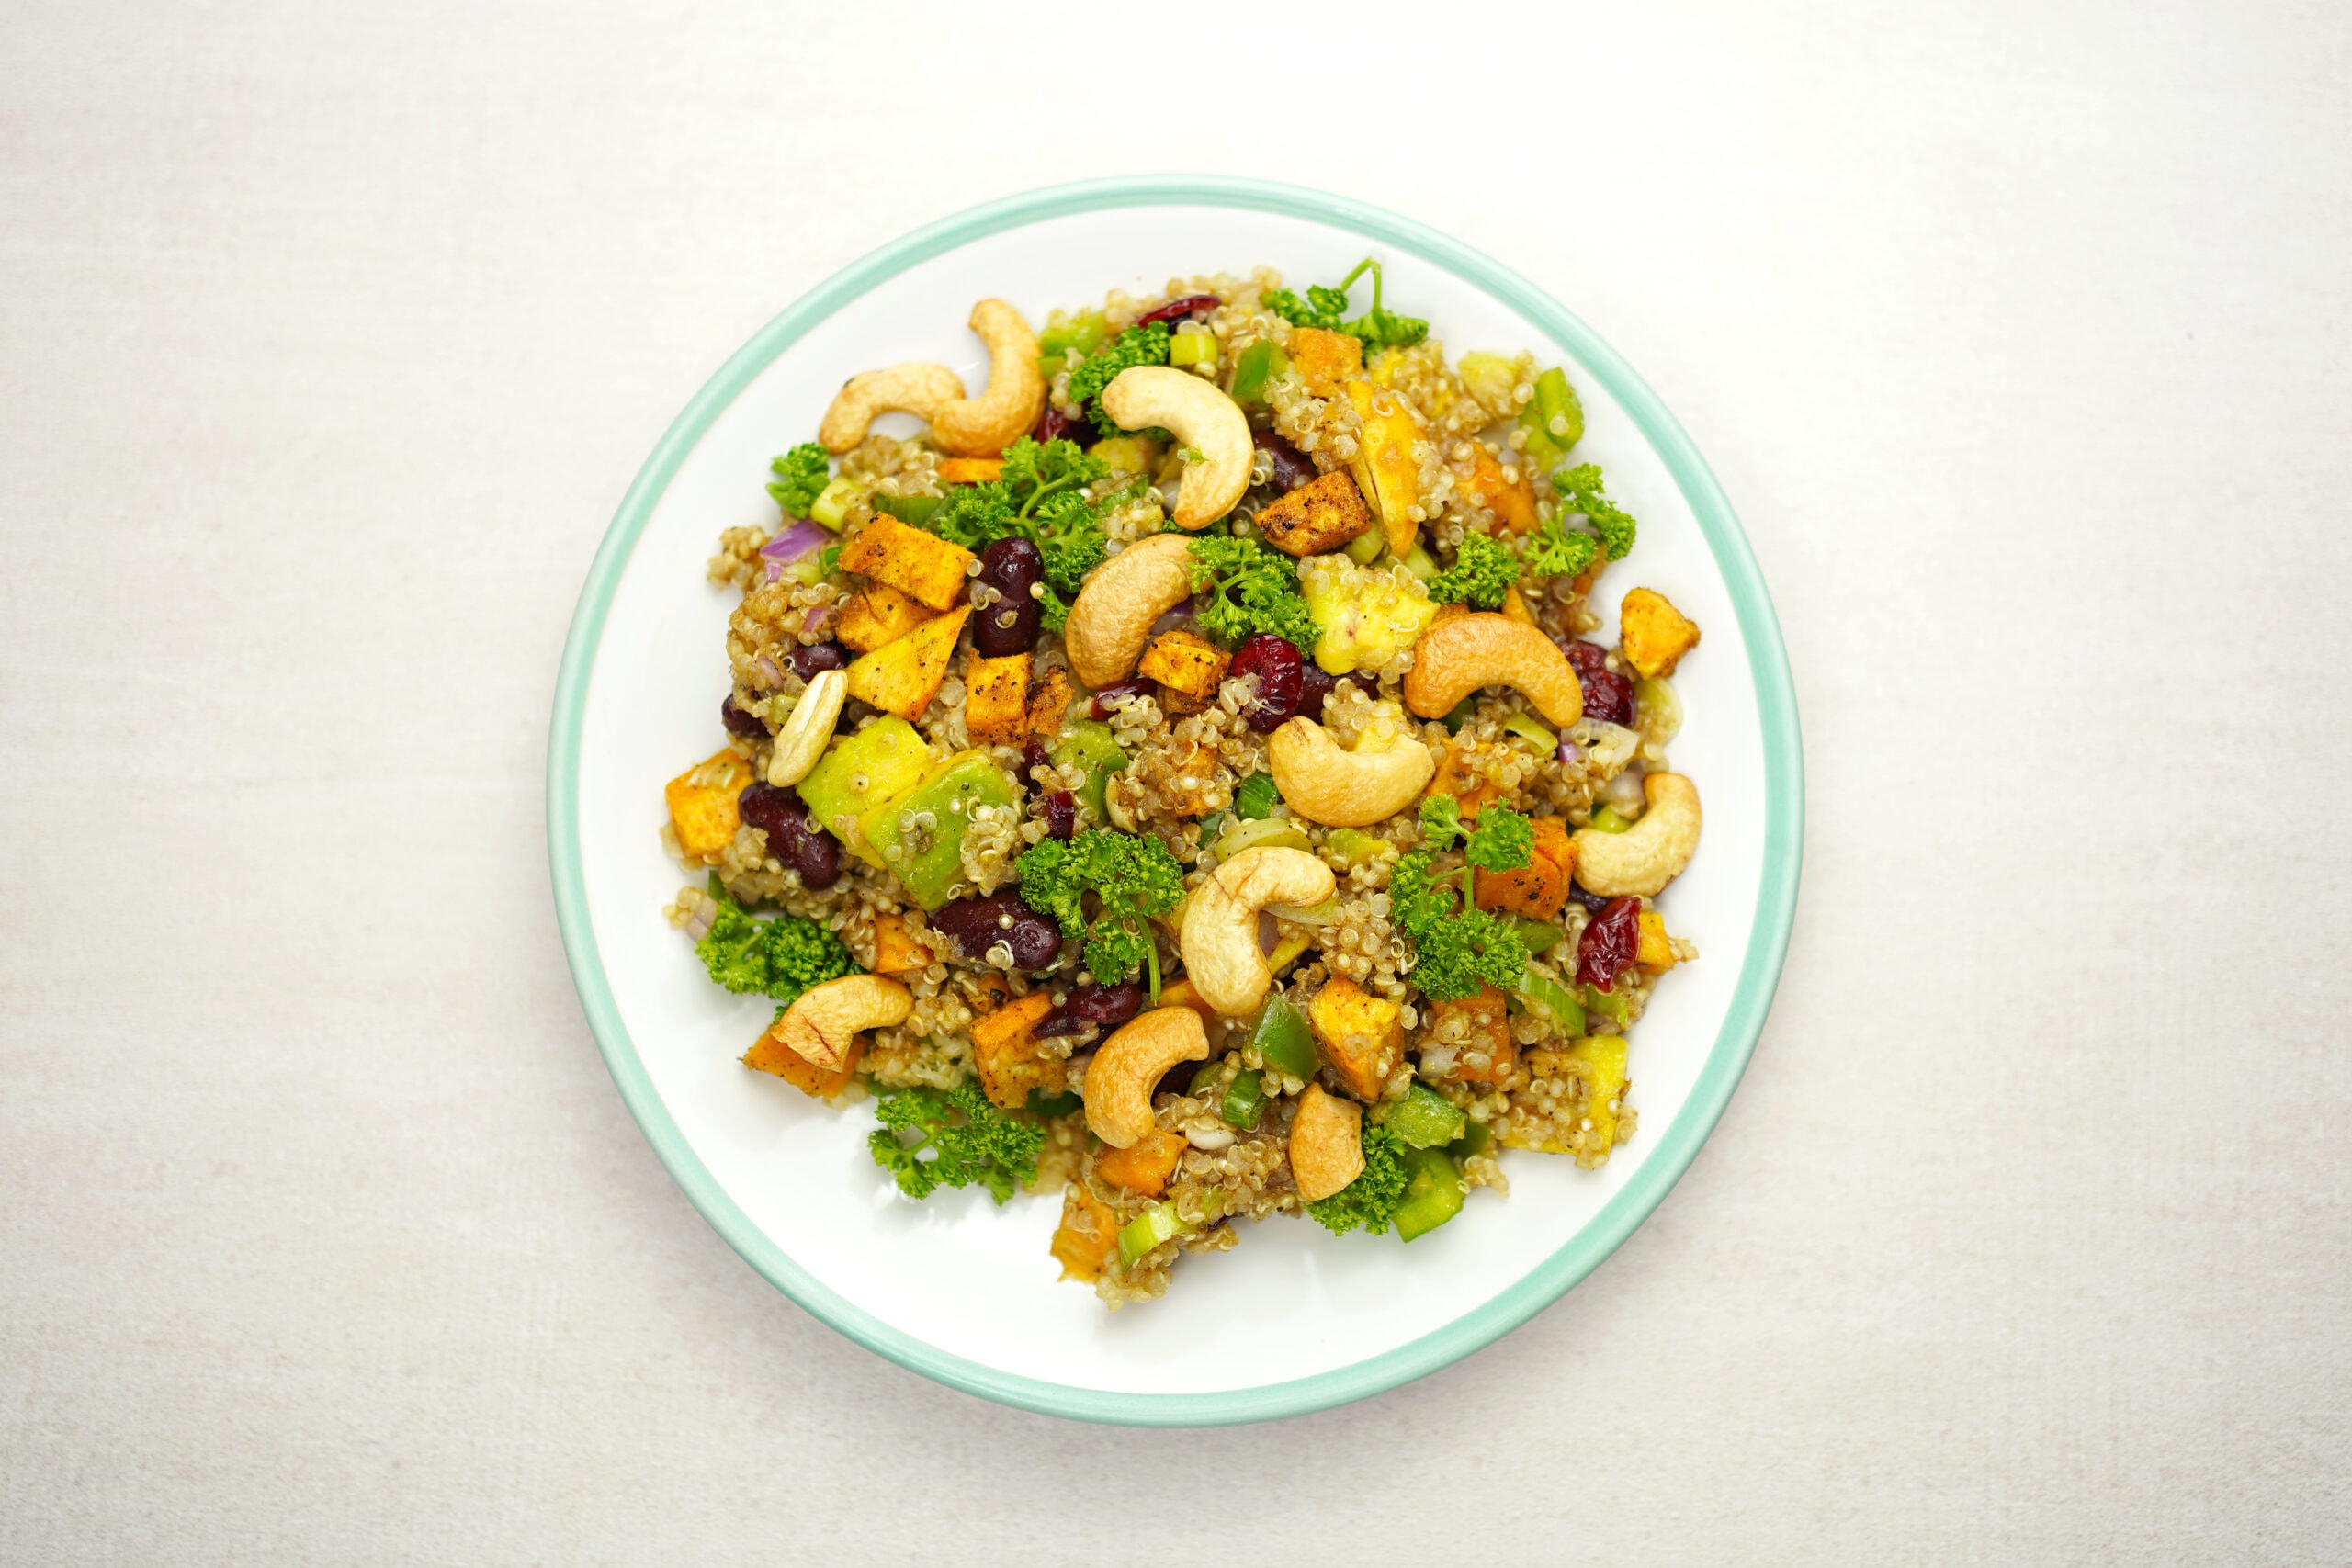 Quinoa salad with vegetables and cashews.